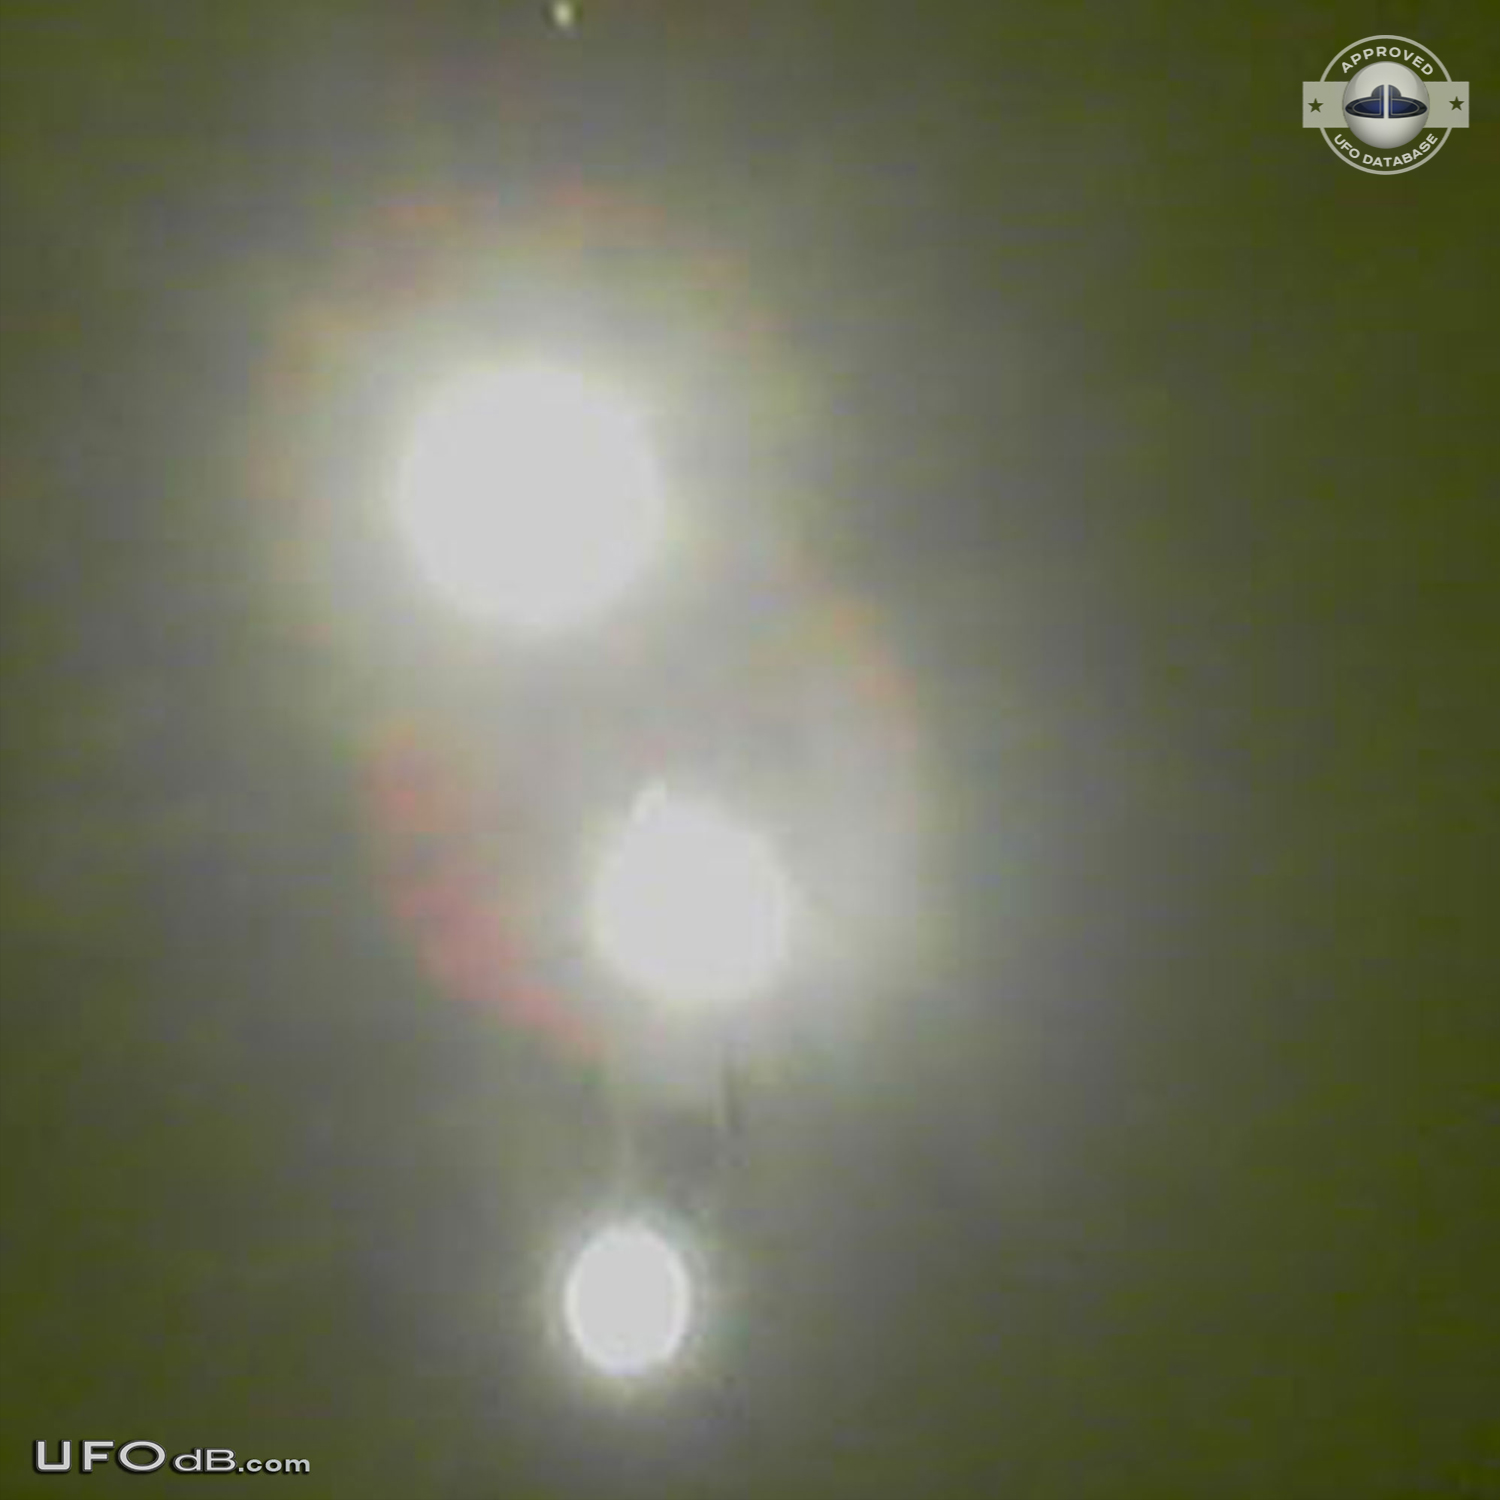 Croatia 2004 UFO picture showing bright spheres in the night UFO Picture #428-1